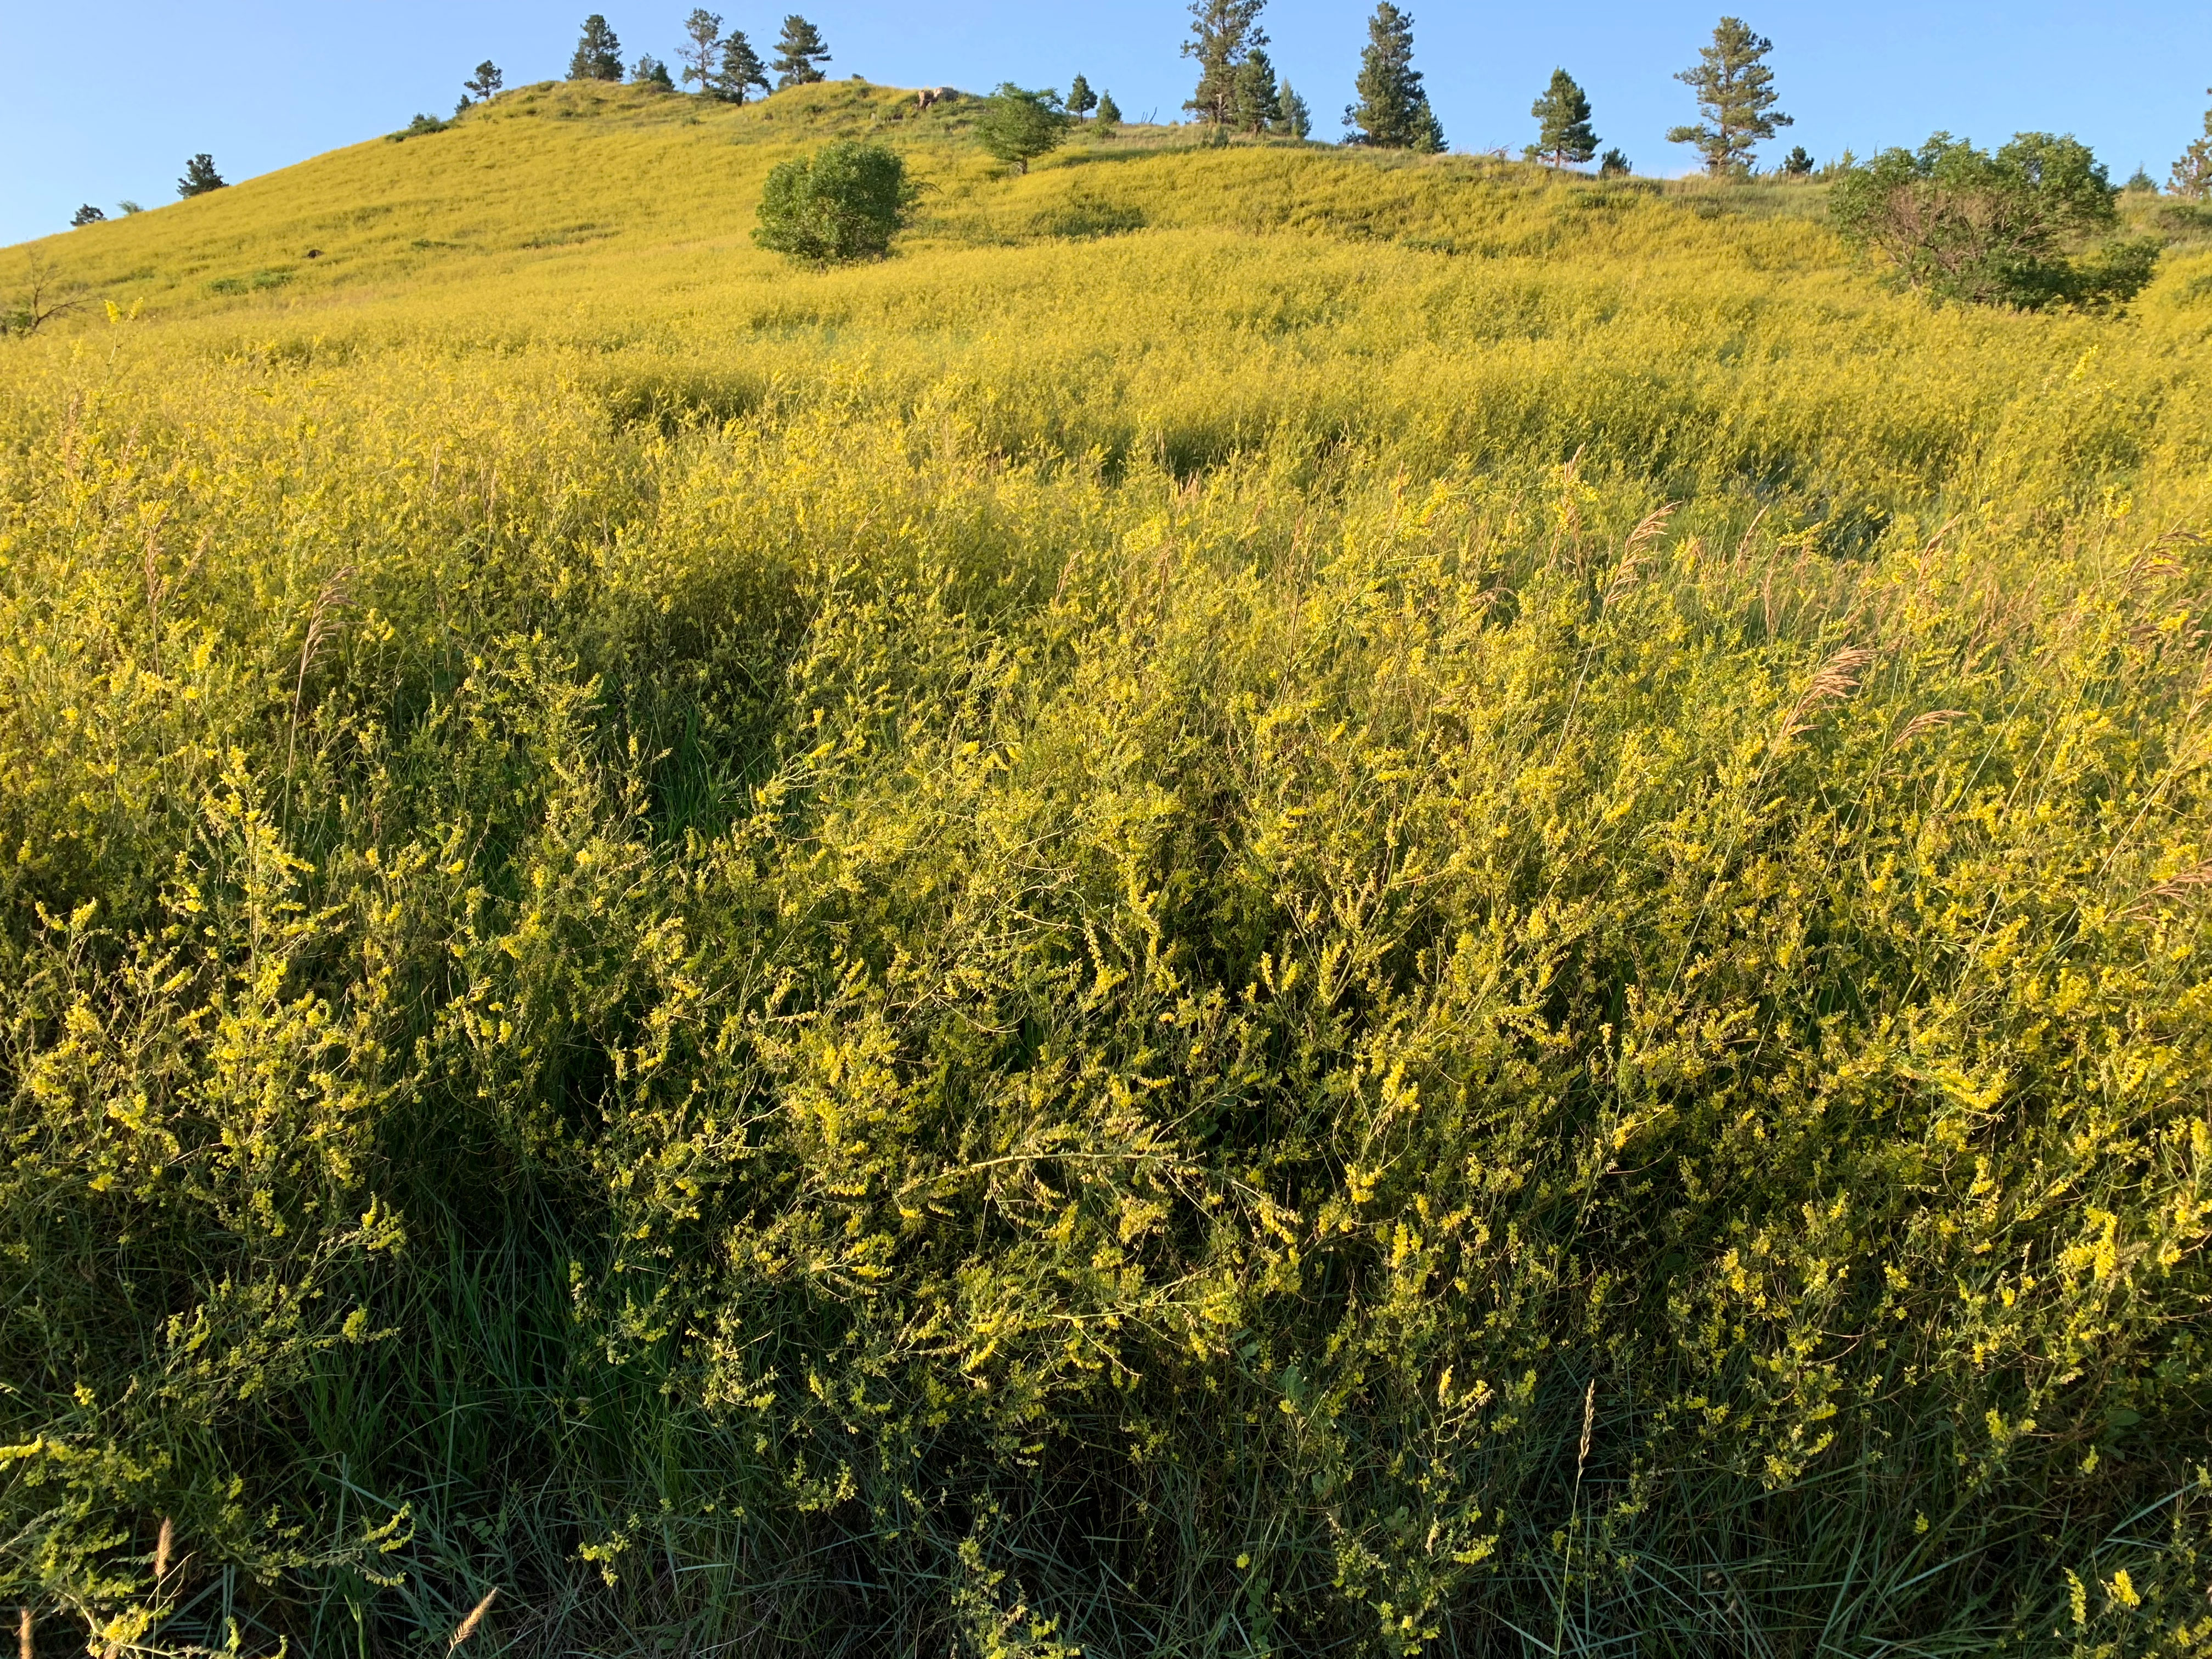 A field of yellow sweet clover in bloom.